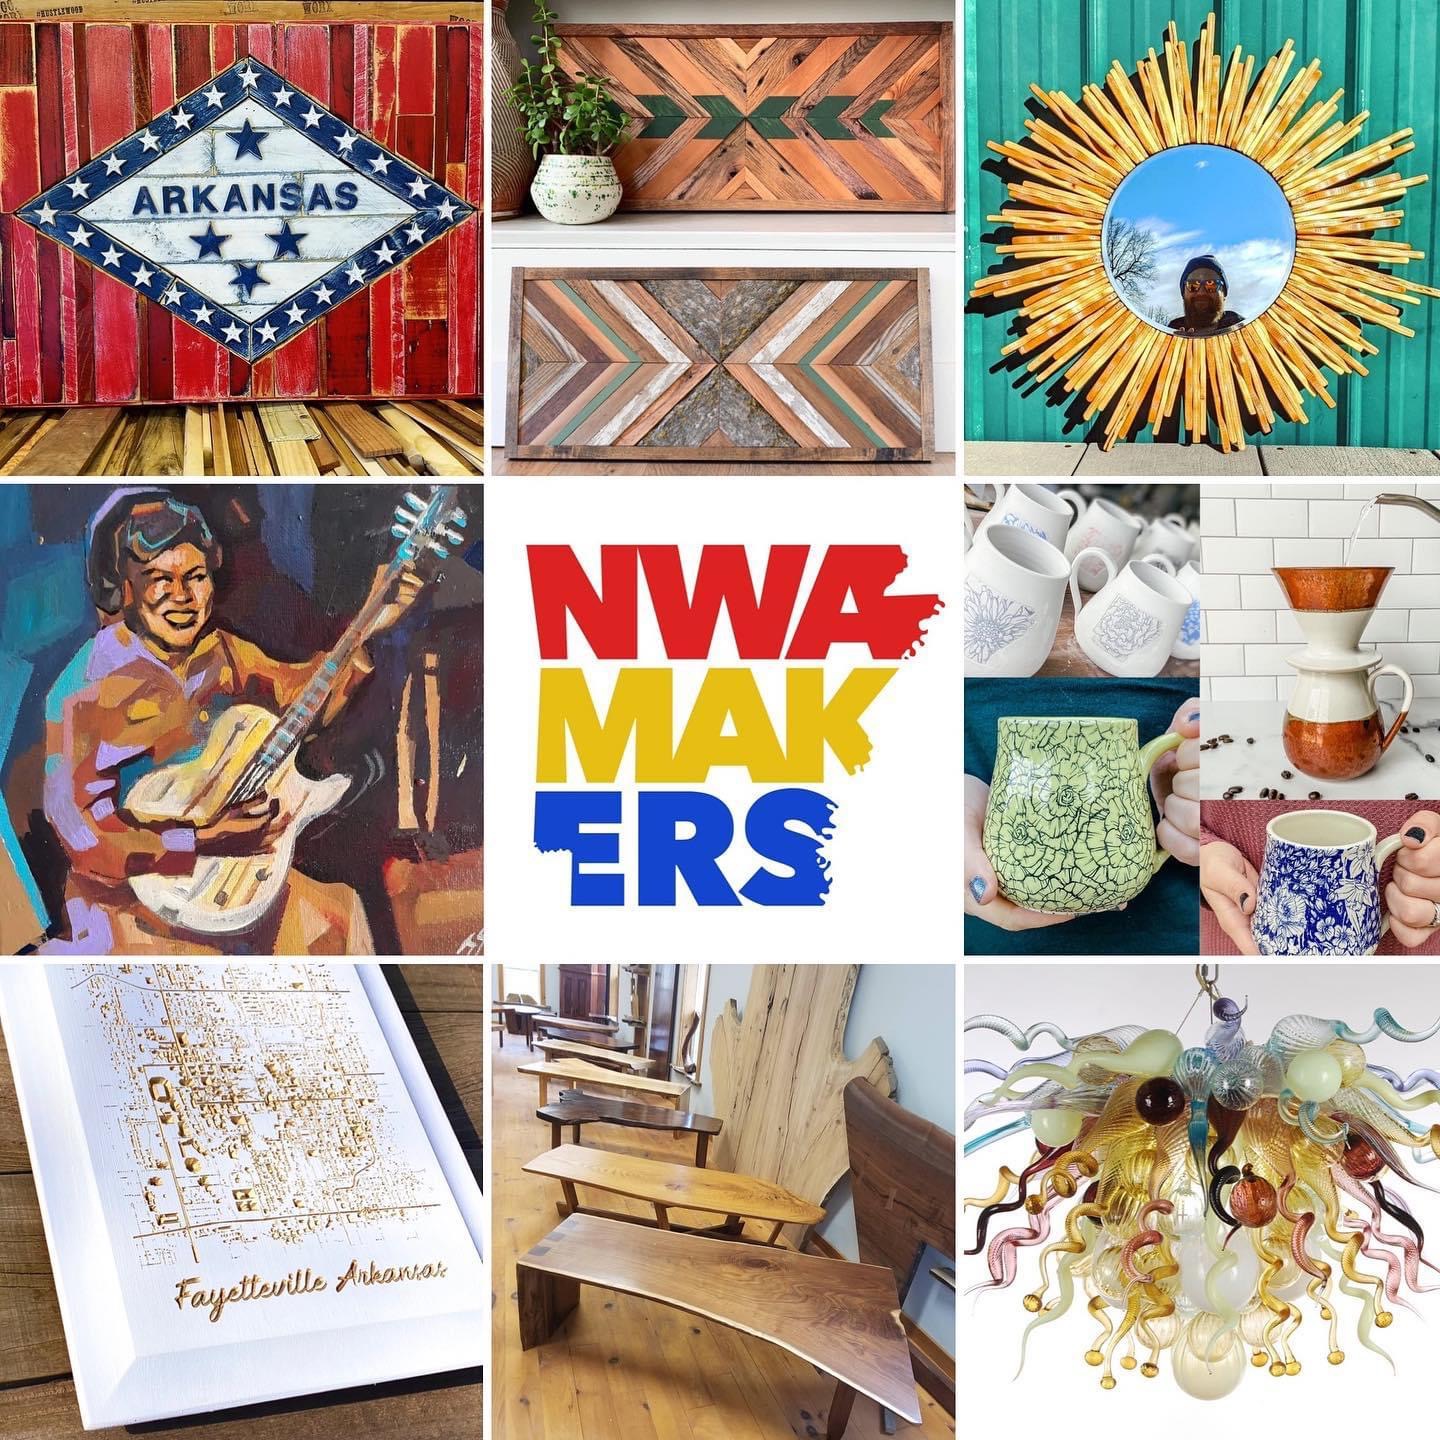 NWA Makers Gallery (@nwamakers) • Instagram photos and videos